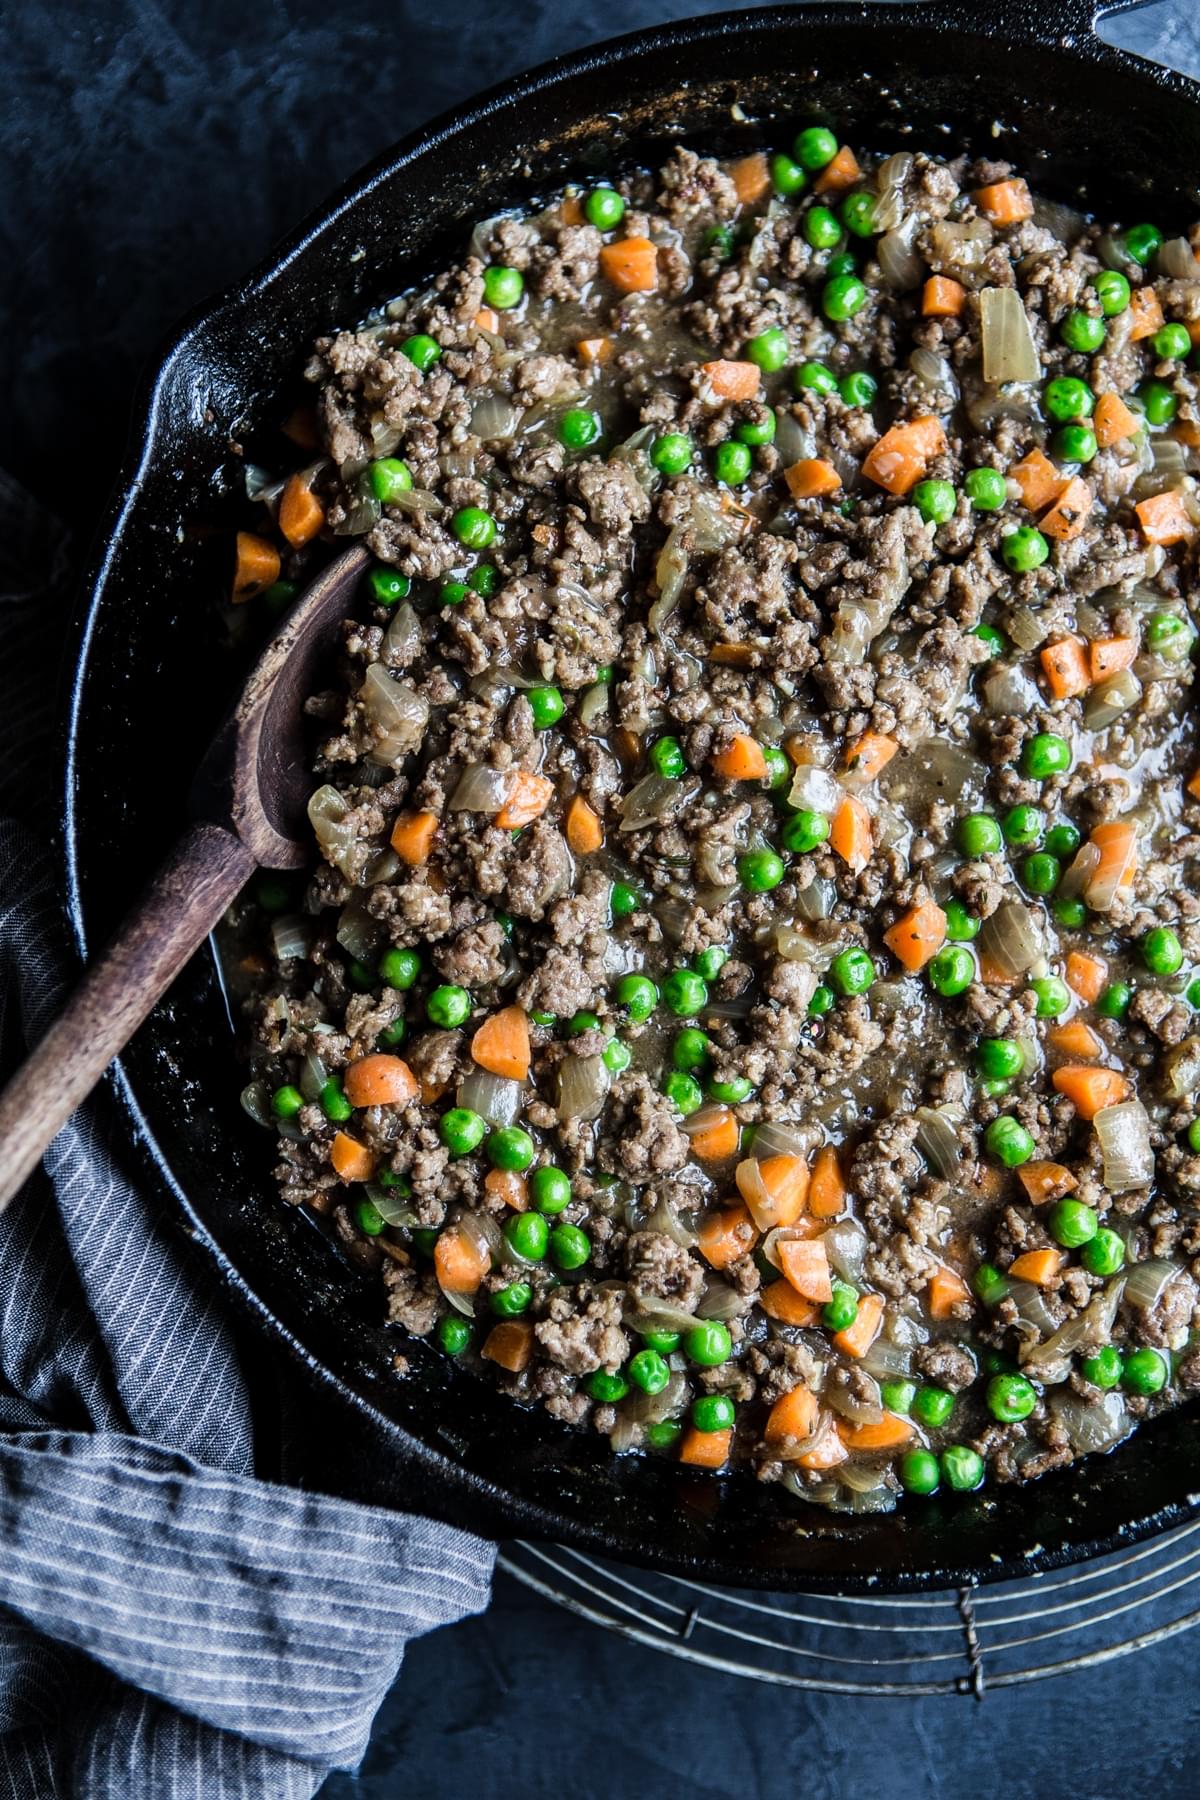 Filling for lamb shepherd's pie, ground lamb, onion, carrots and peas in a cast iron pan with a wooden spoon